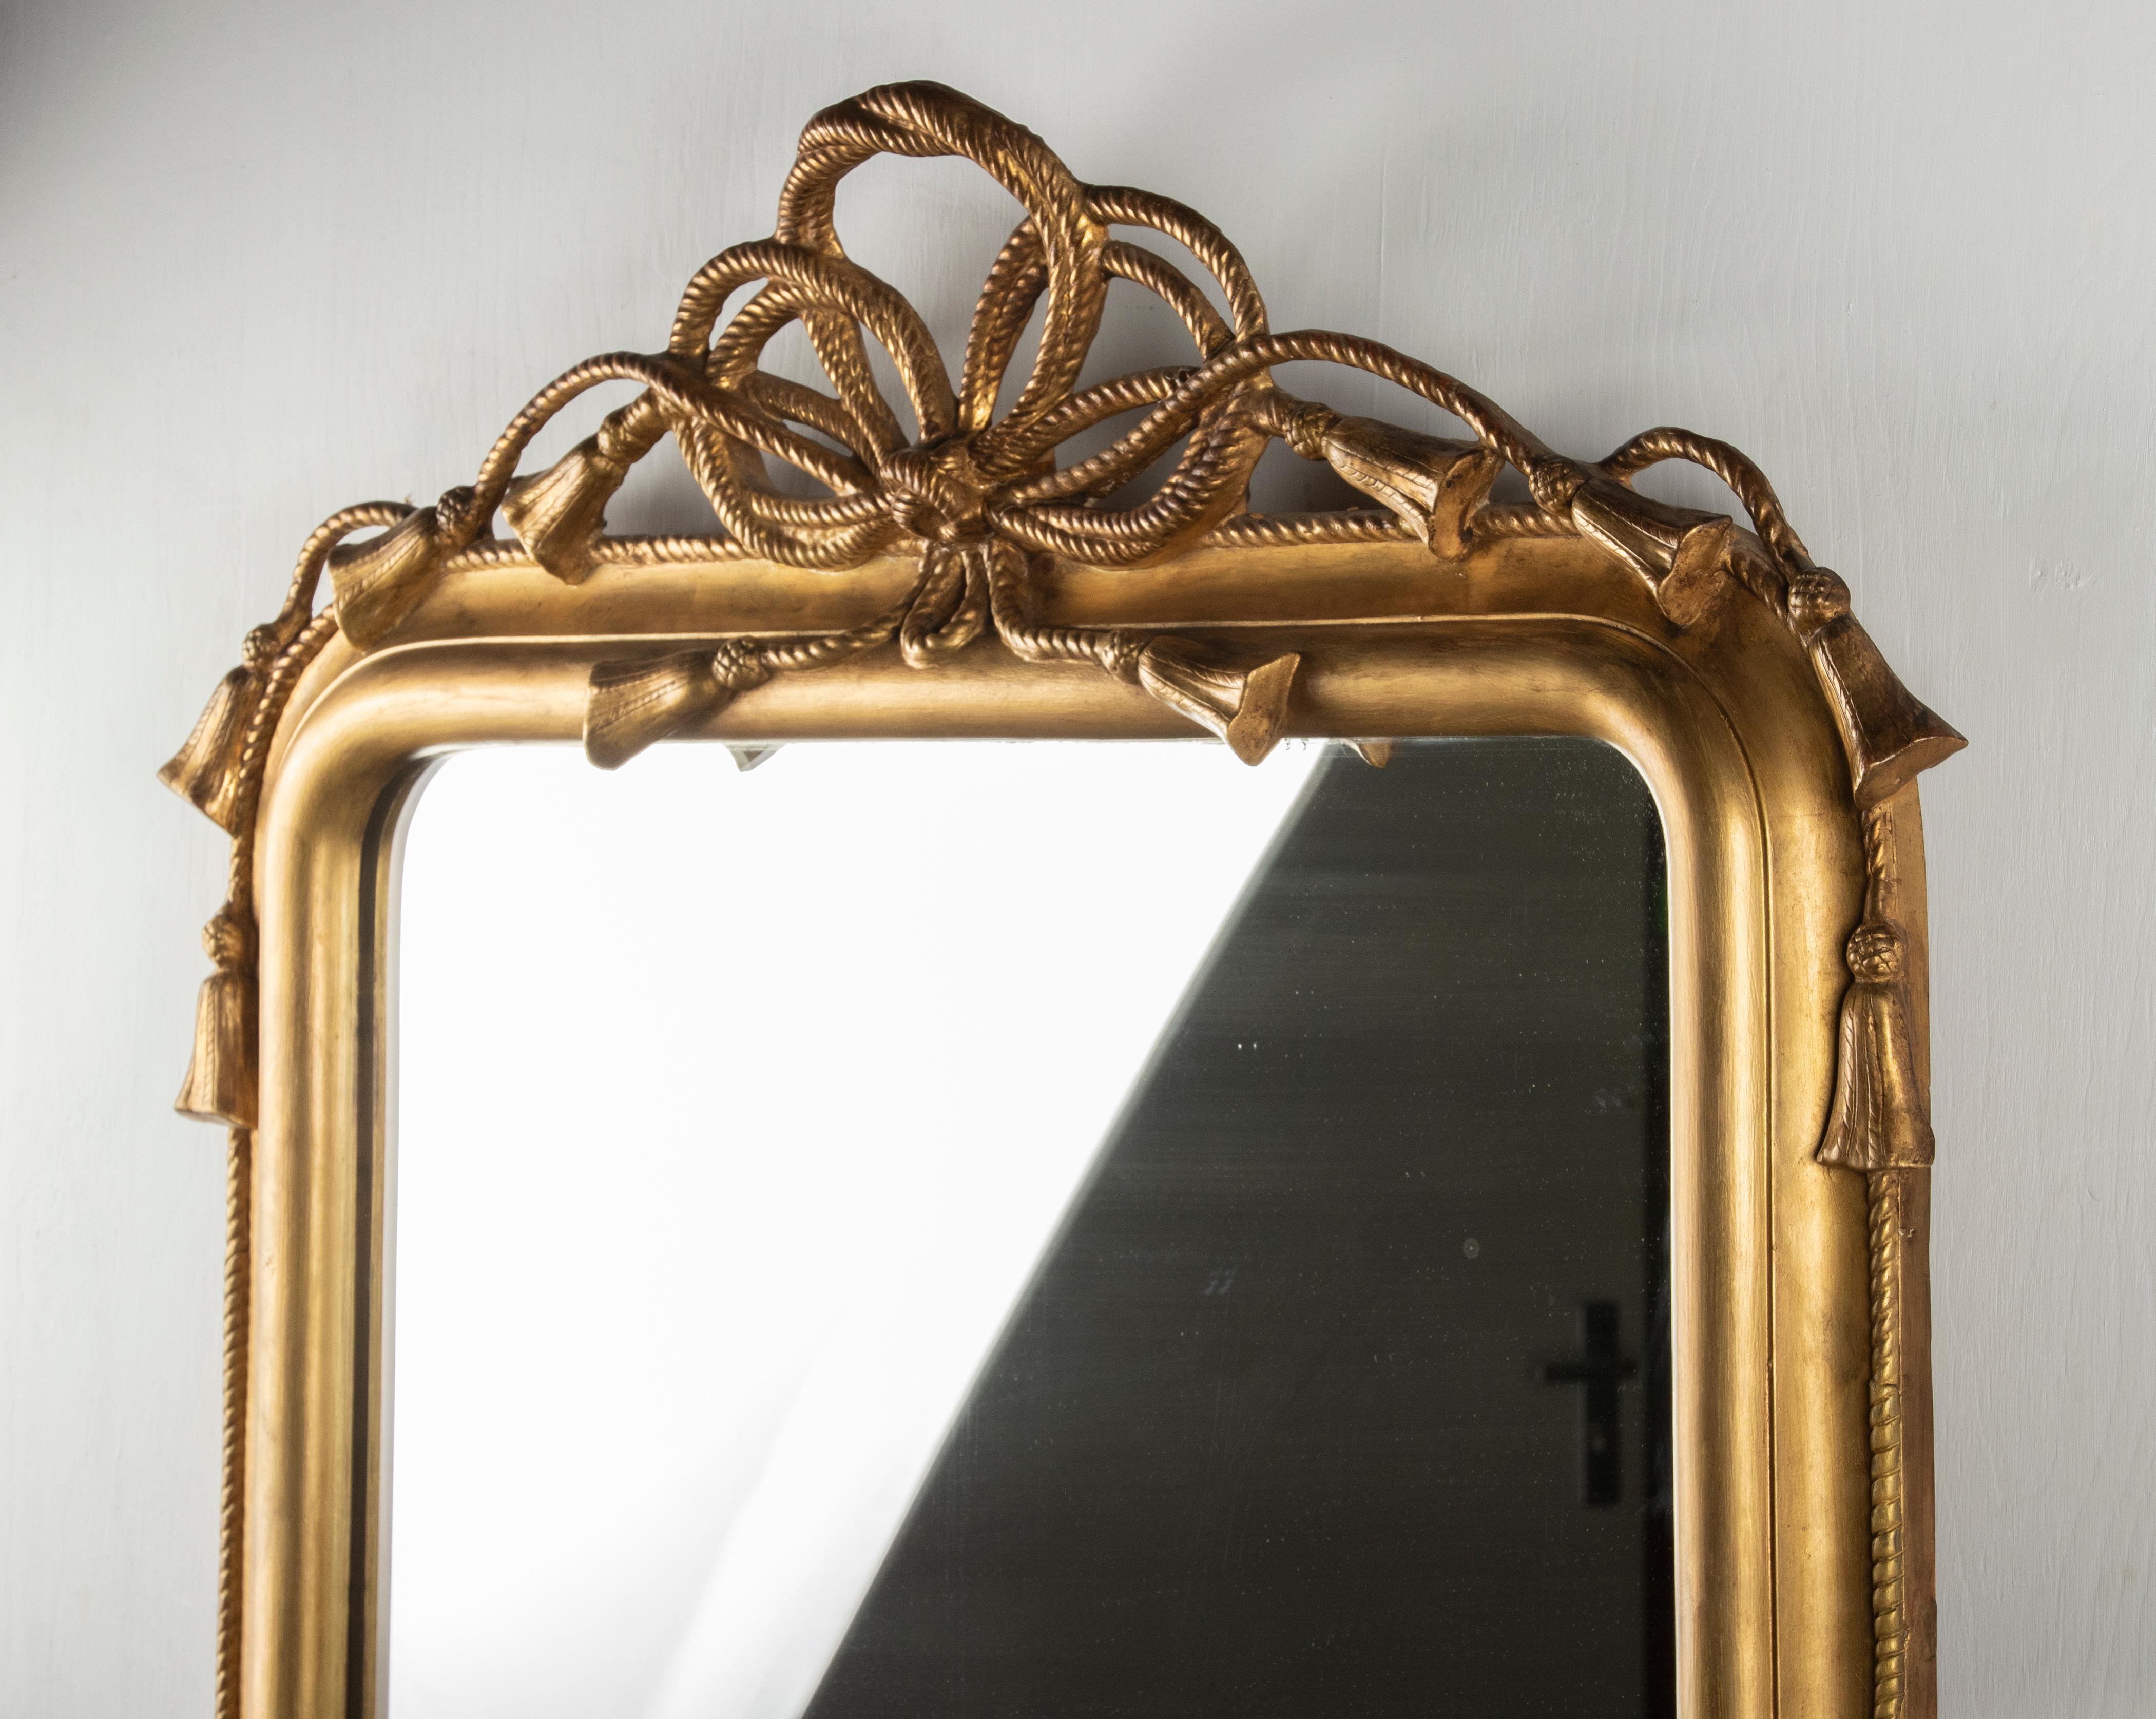 19th Century Napoleon III Gilded Wall Mirror with Rope and Tassels For Sale 10